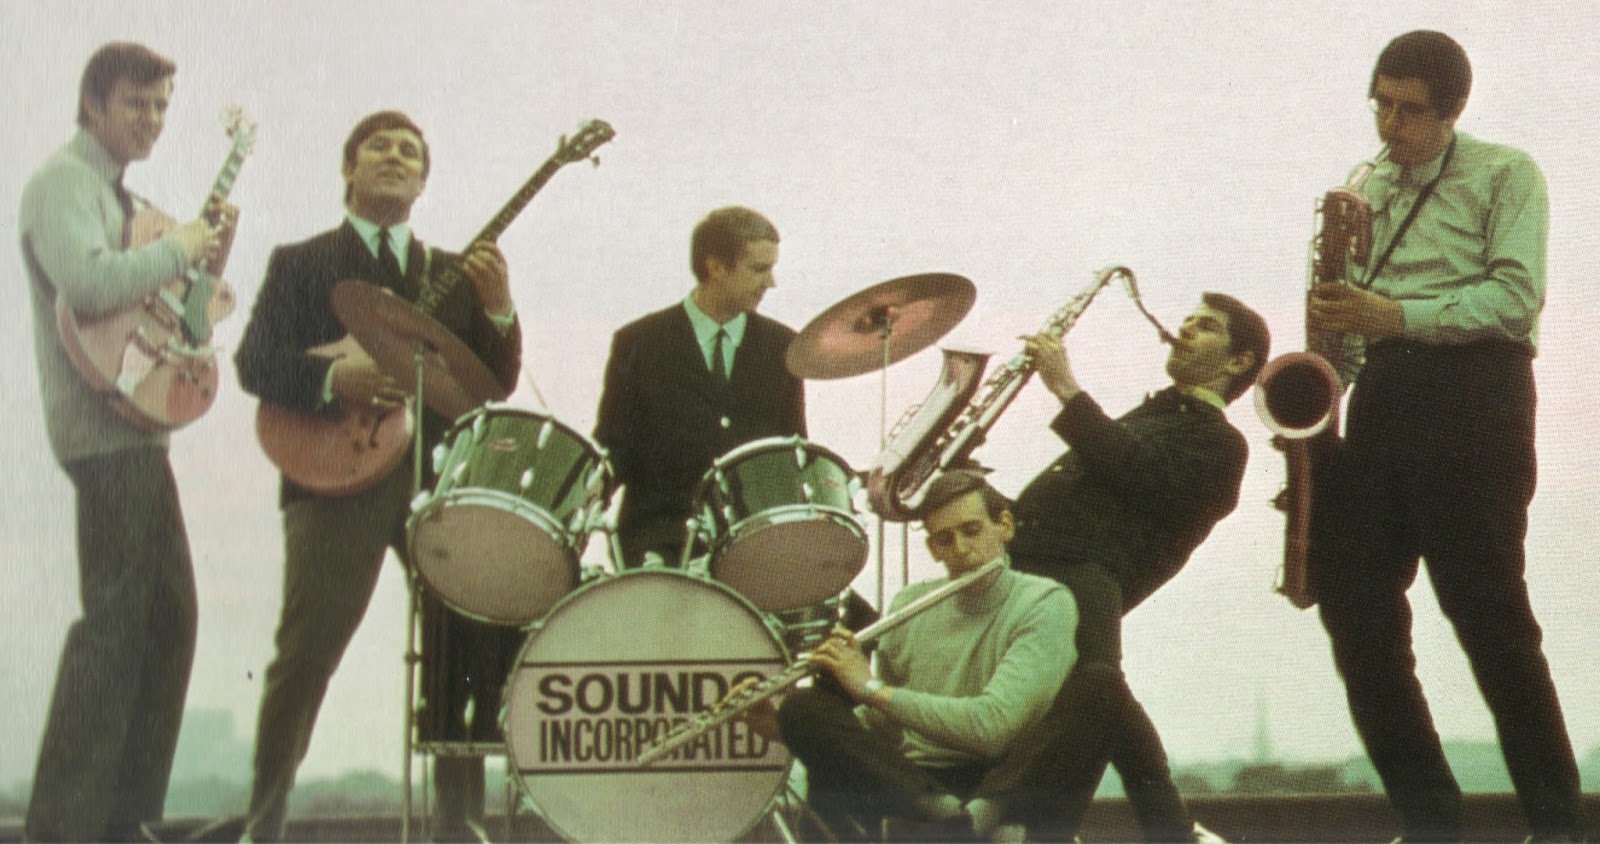 The Sounds Incorporated Band in an early outside publicity shot.